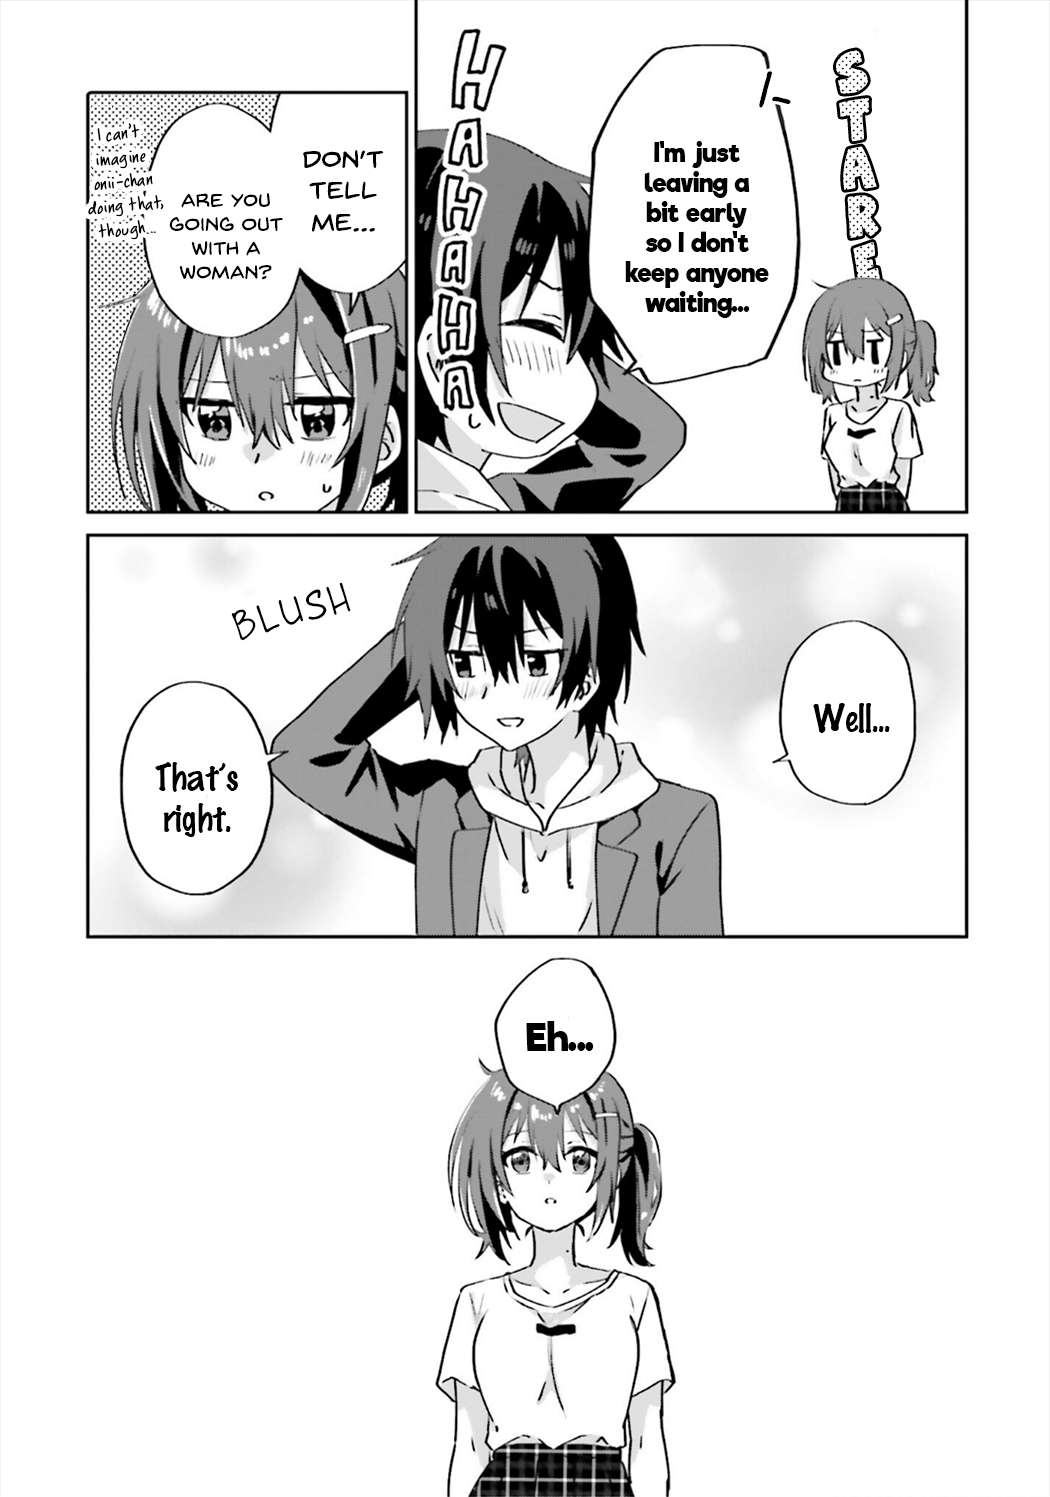 Since I’Ve Entered The World Of Romantic Comedy Manga, I’Ll Do My Best To Make The Losing Heroine Happy - chapter 6.5 - #3